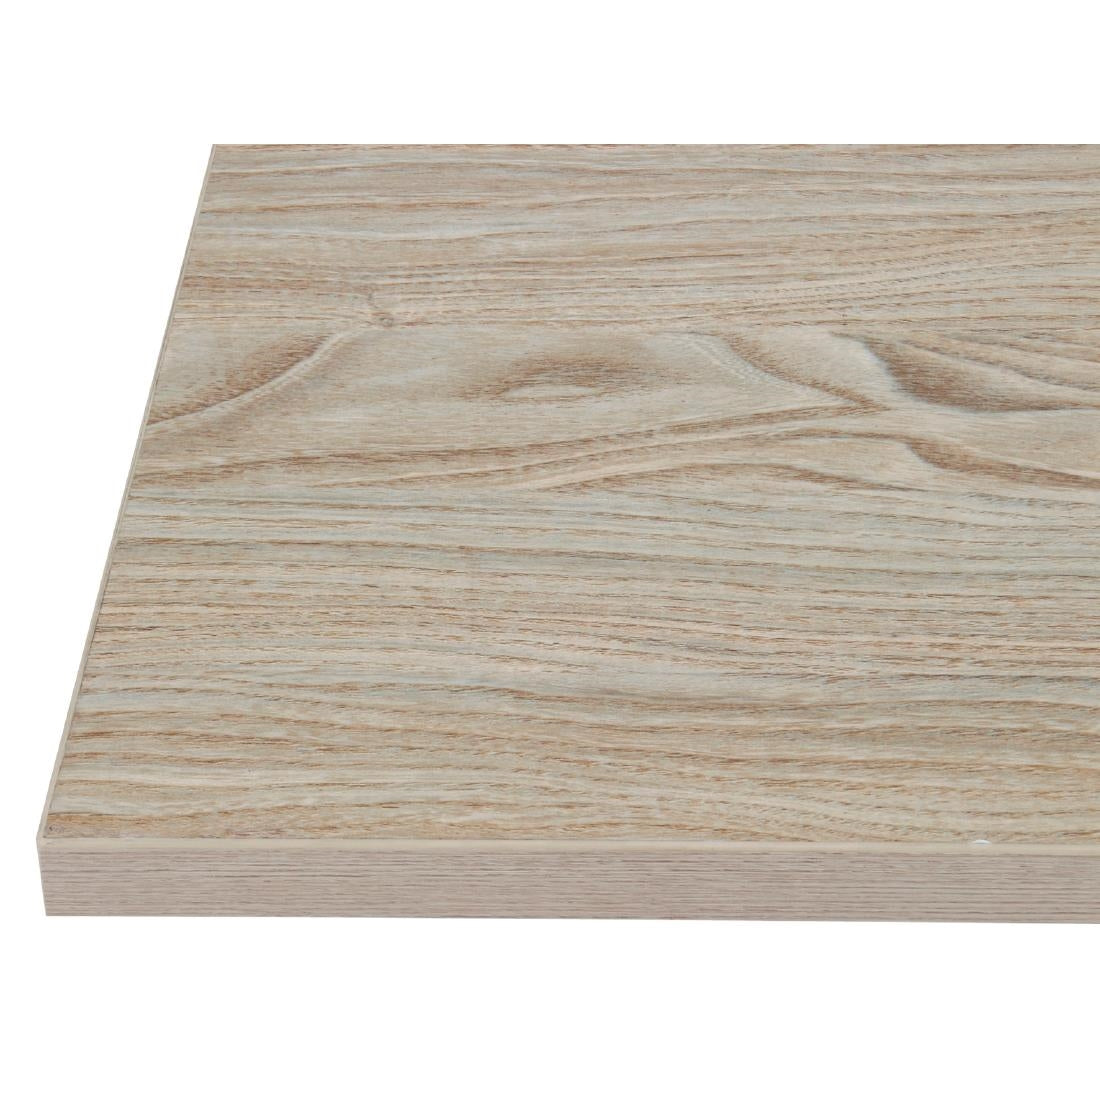 Bolero Pre-drilled Square Table Top Antique Natural 600mm JD Catering Equipment Solutions Ltd